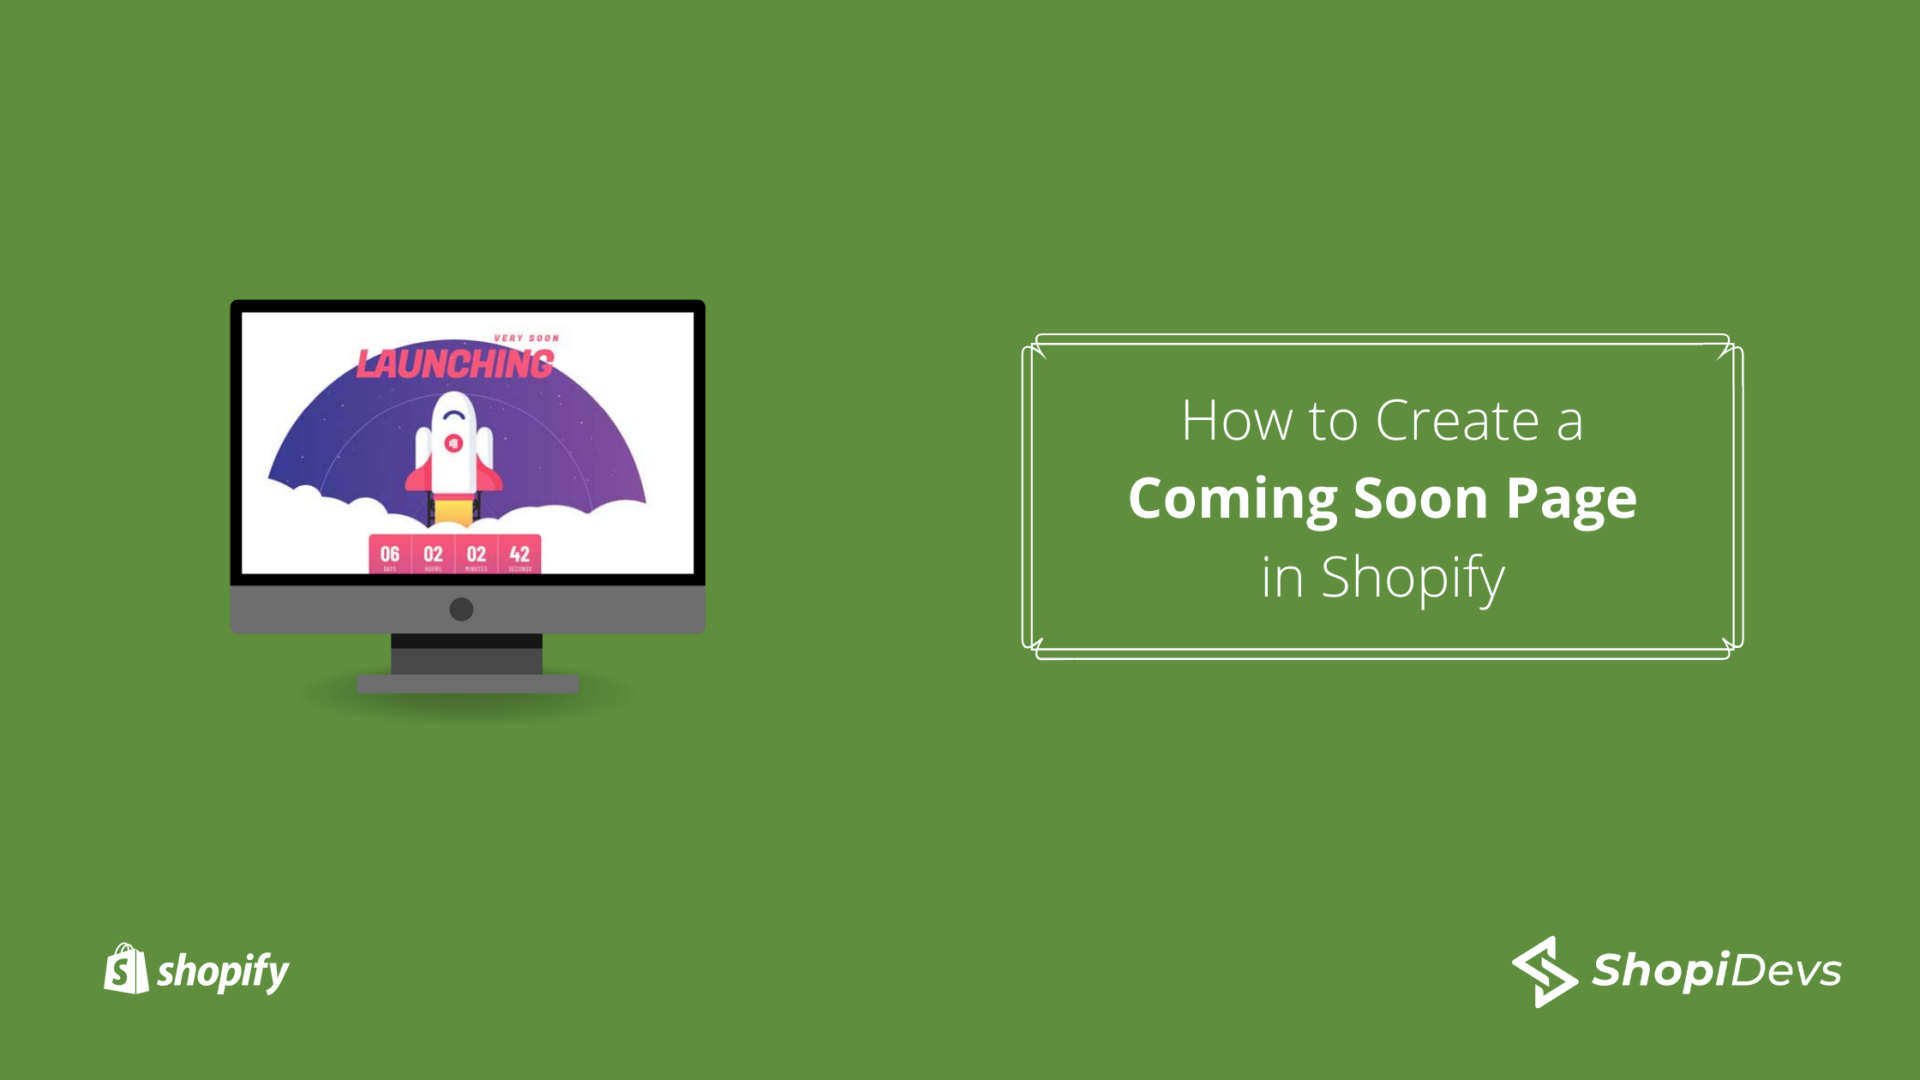 How to create a coming soon page in Shopify